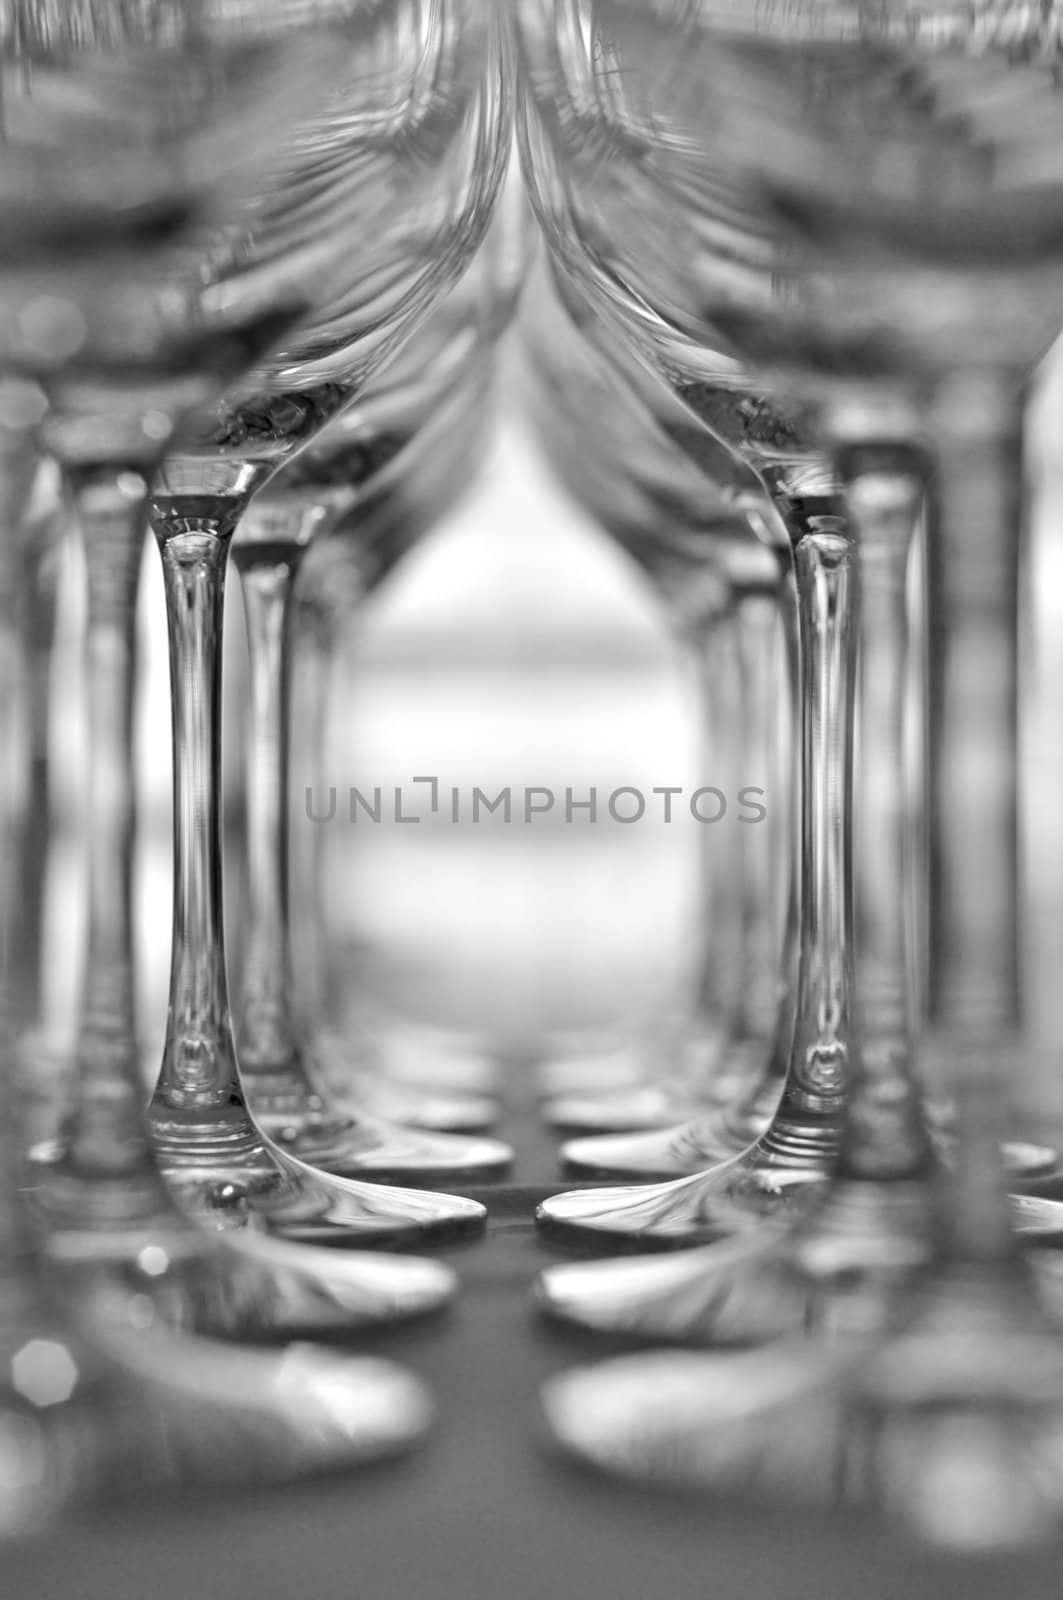 Rows of Empty Wine Glasses on the table